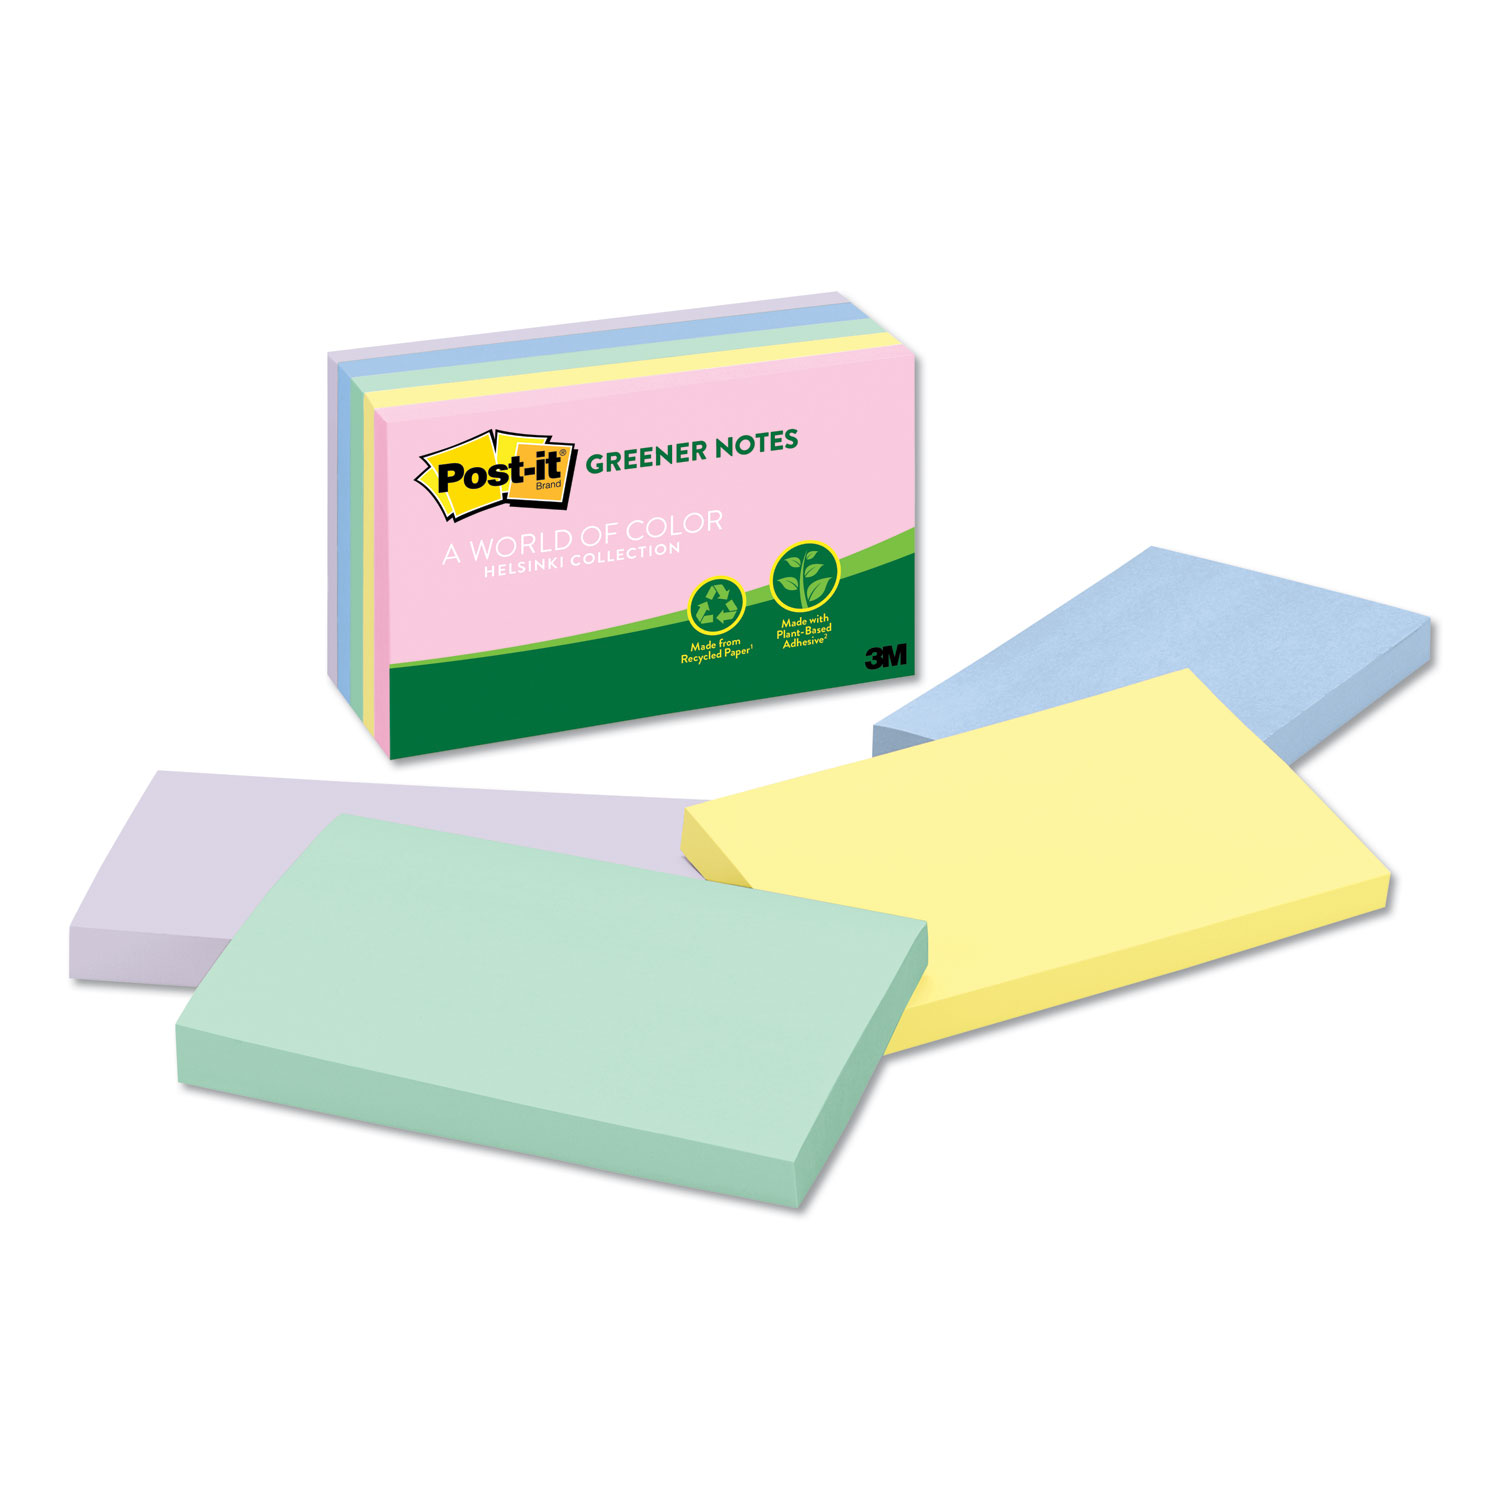  Post-it Greener Notes 655-RP-A Recycled Note Pads, 3 x 5, Assorted Helsinki Colors, 100-Sheet, 5/Pack (MMM655RPA) 